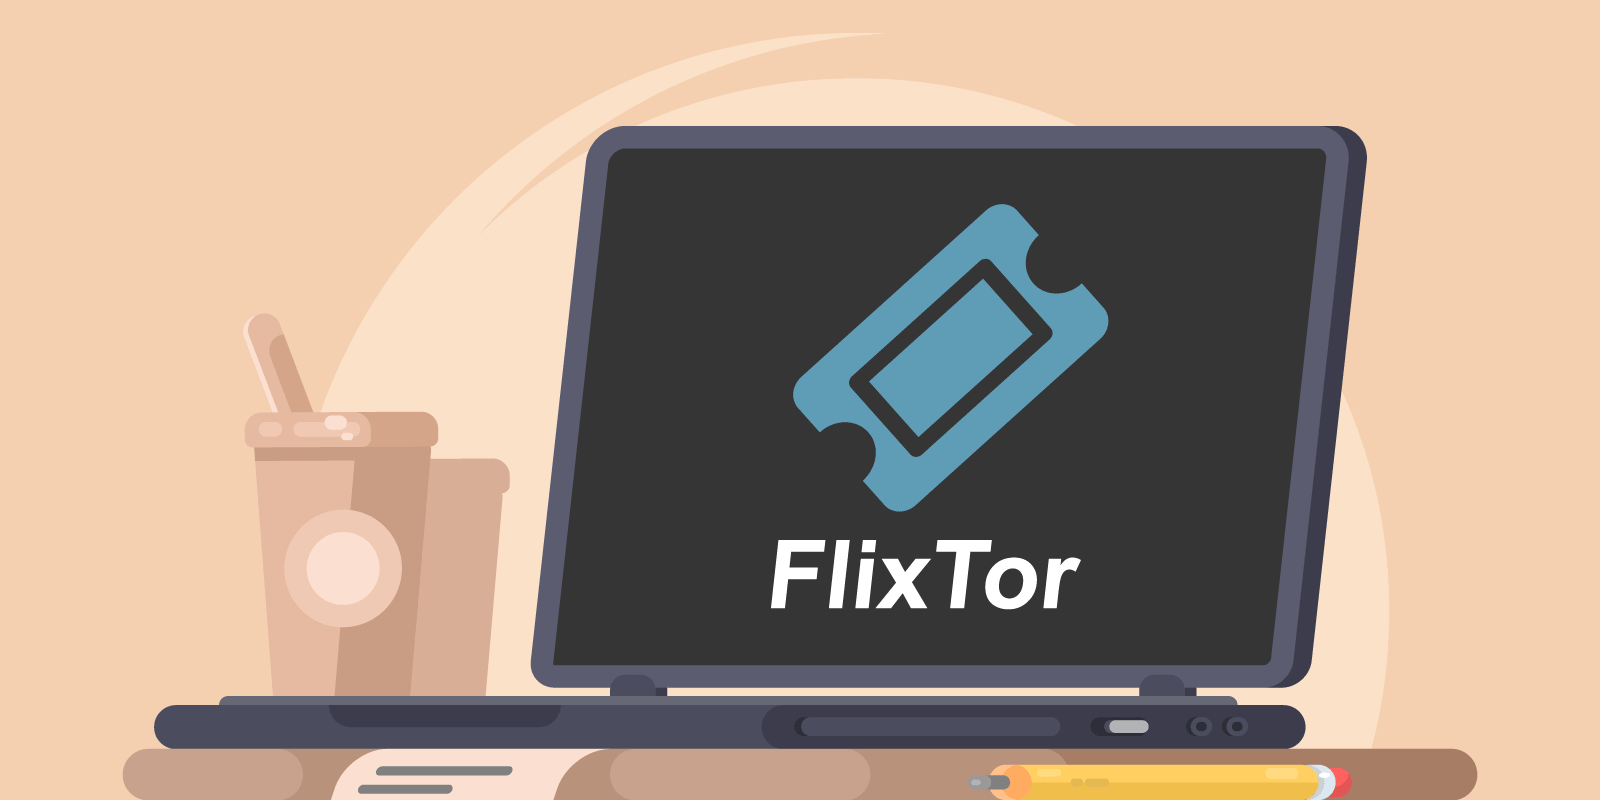 What is Flixtor?